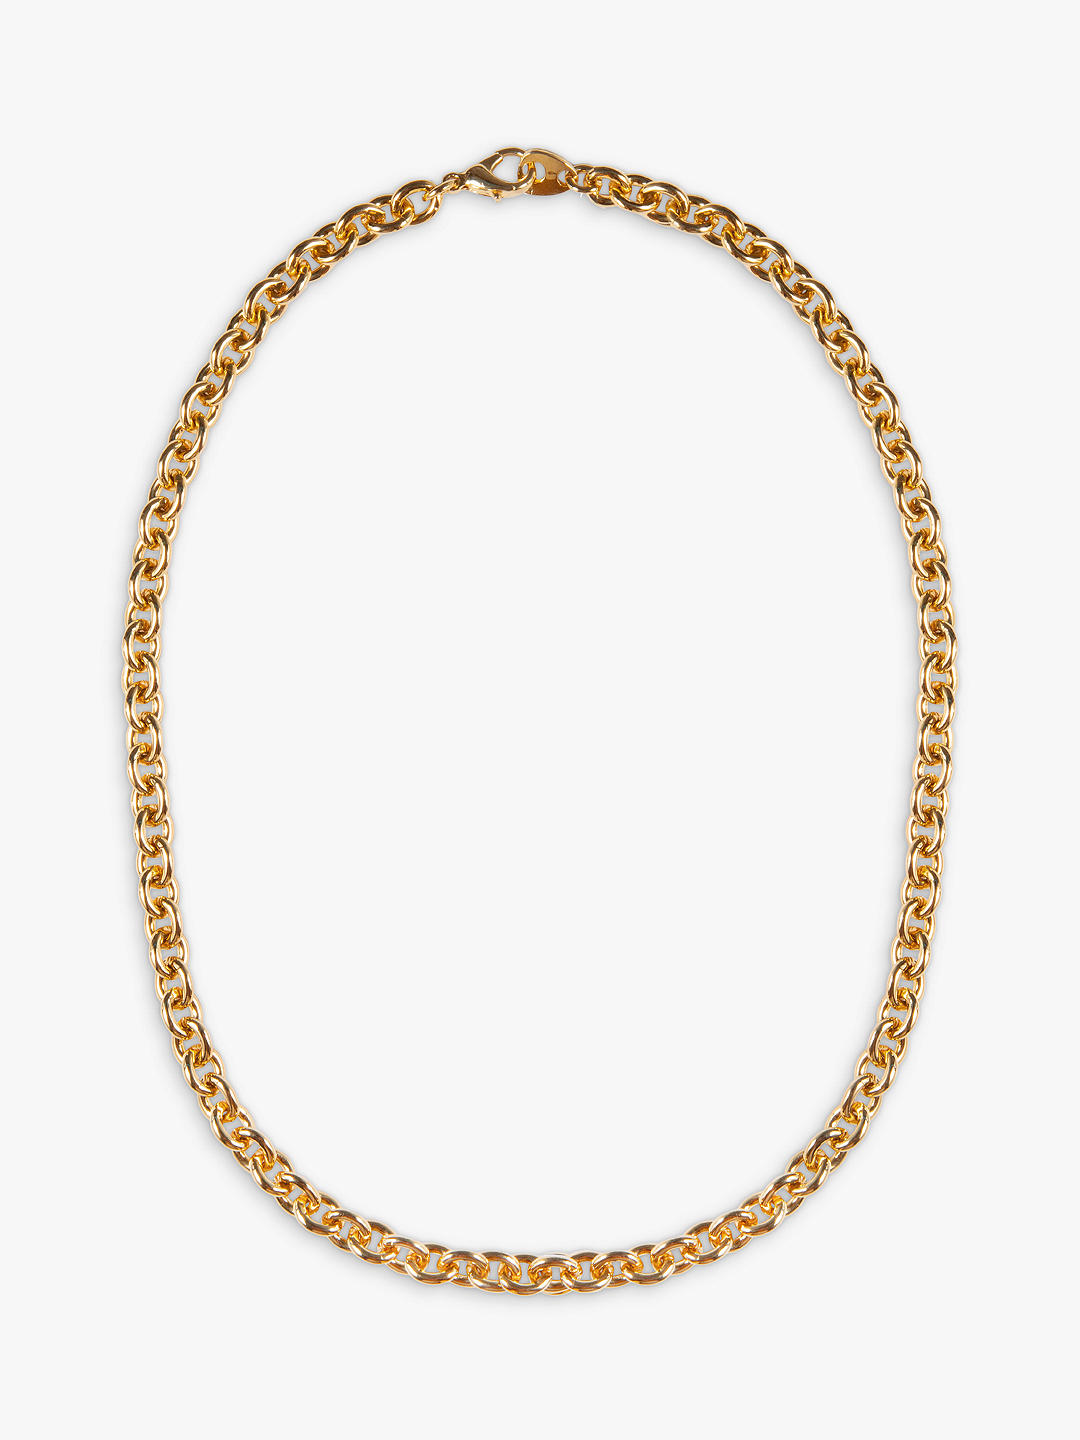 Eclectica Vintage 22ct Gold Plated Chain Necklace, Dated Circa 1980s